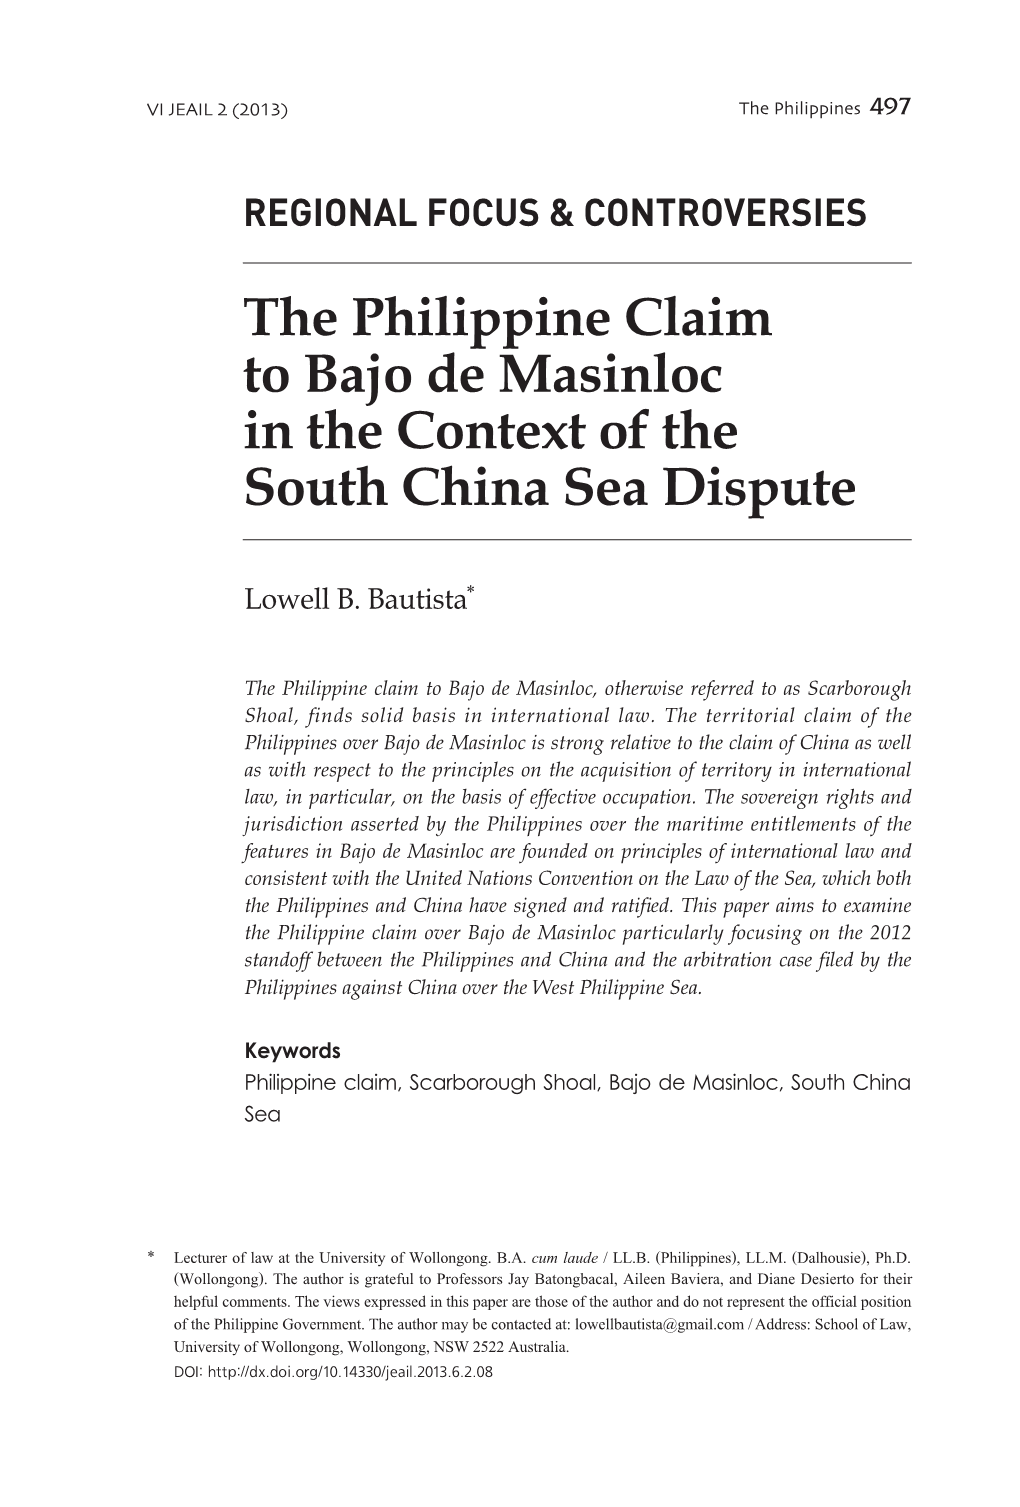 The Philippine Claim to Bajo De Masinloc in the Context of the South China Sea Dispute